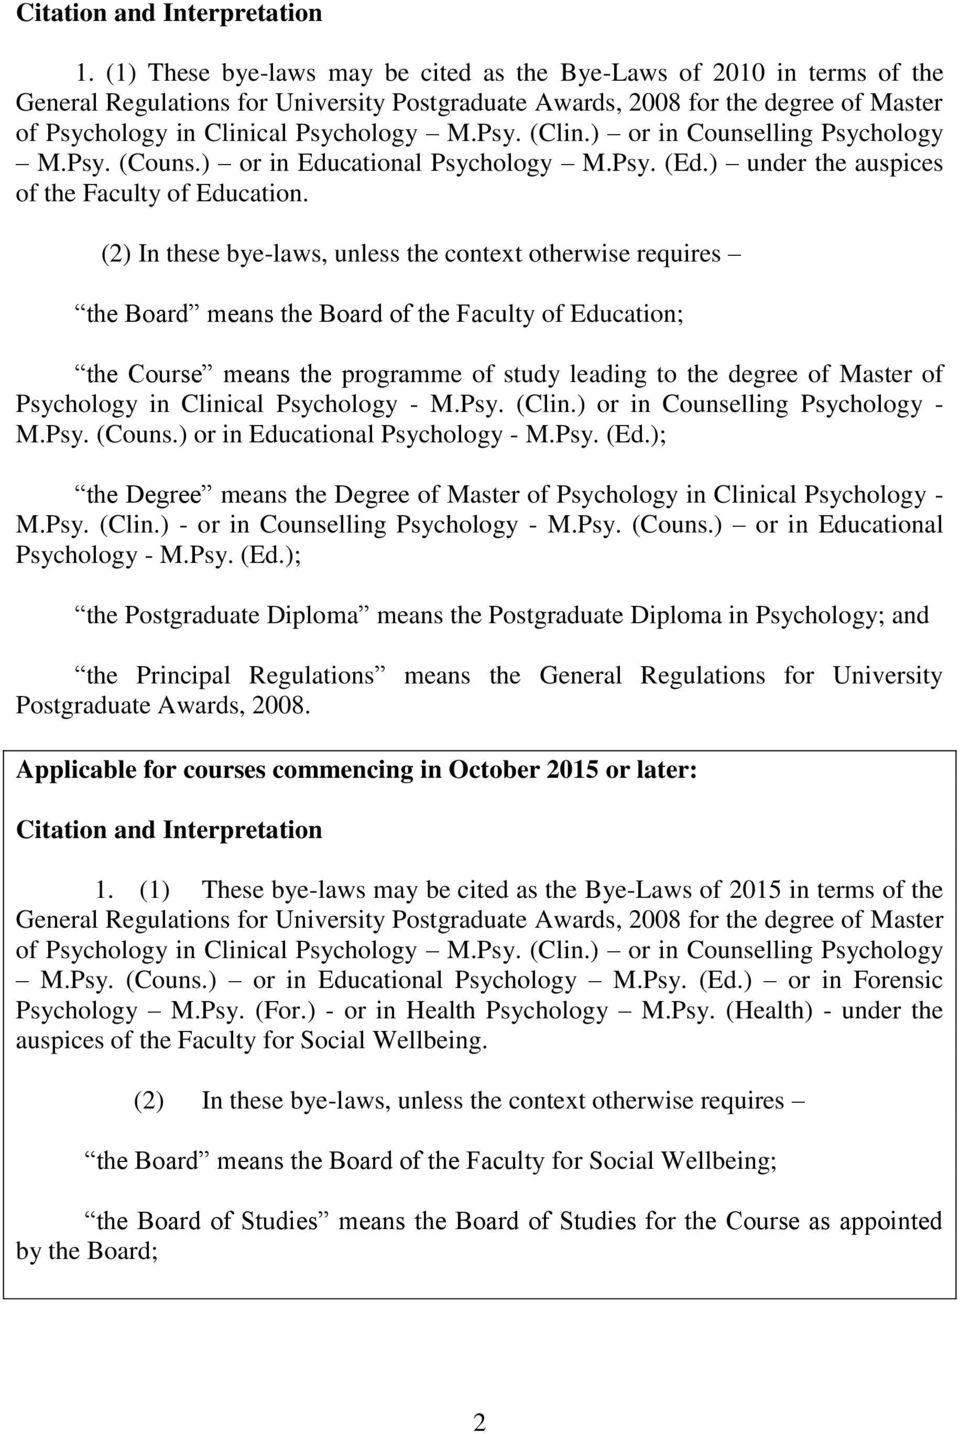 Psy. (Clin.) or in Counselling Psychology M.Psy. (Couns.) or in Educational Psychology M.Psy. (Ed.) under the auspices of the Faculty of Education.